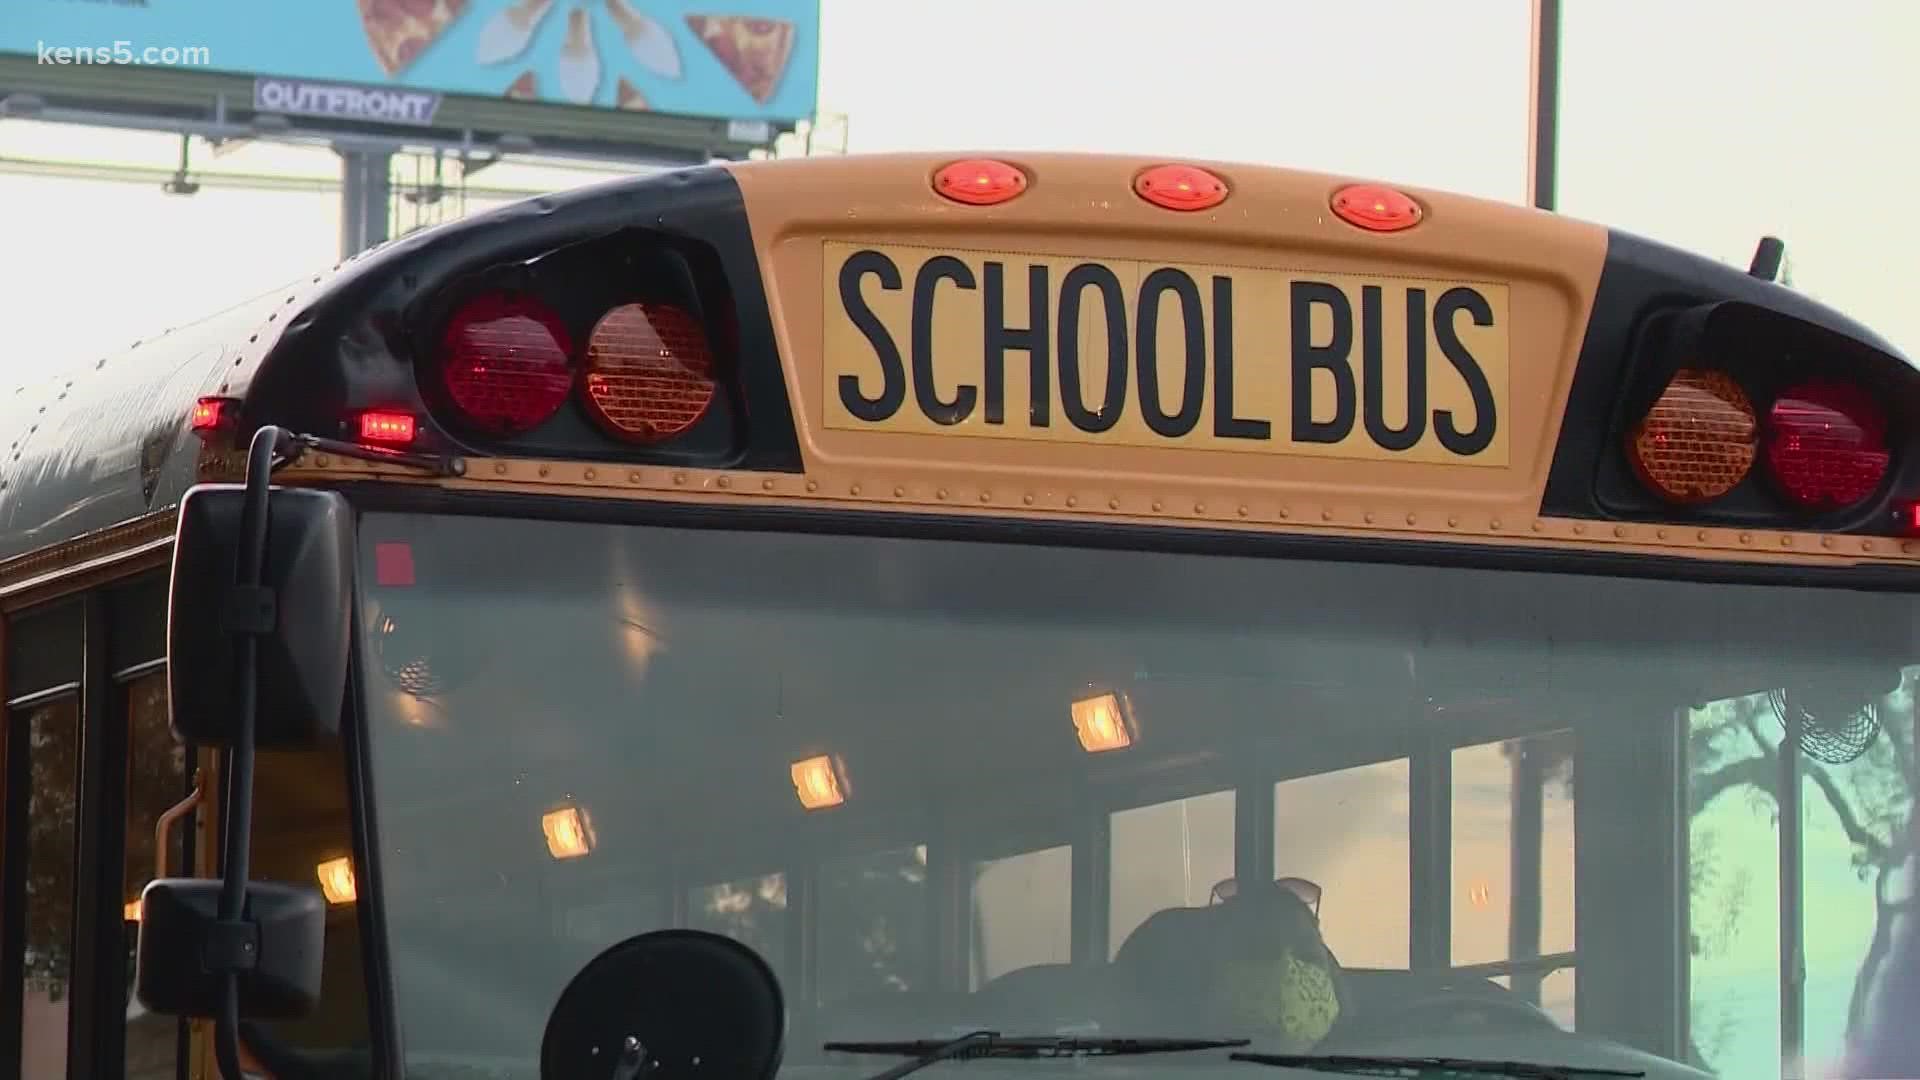 Thousands of students will be taking the bus every day to school this year. Now parents can keep tabs on their journey.